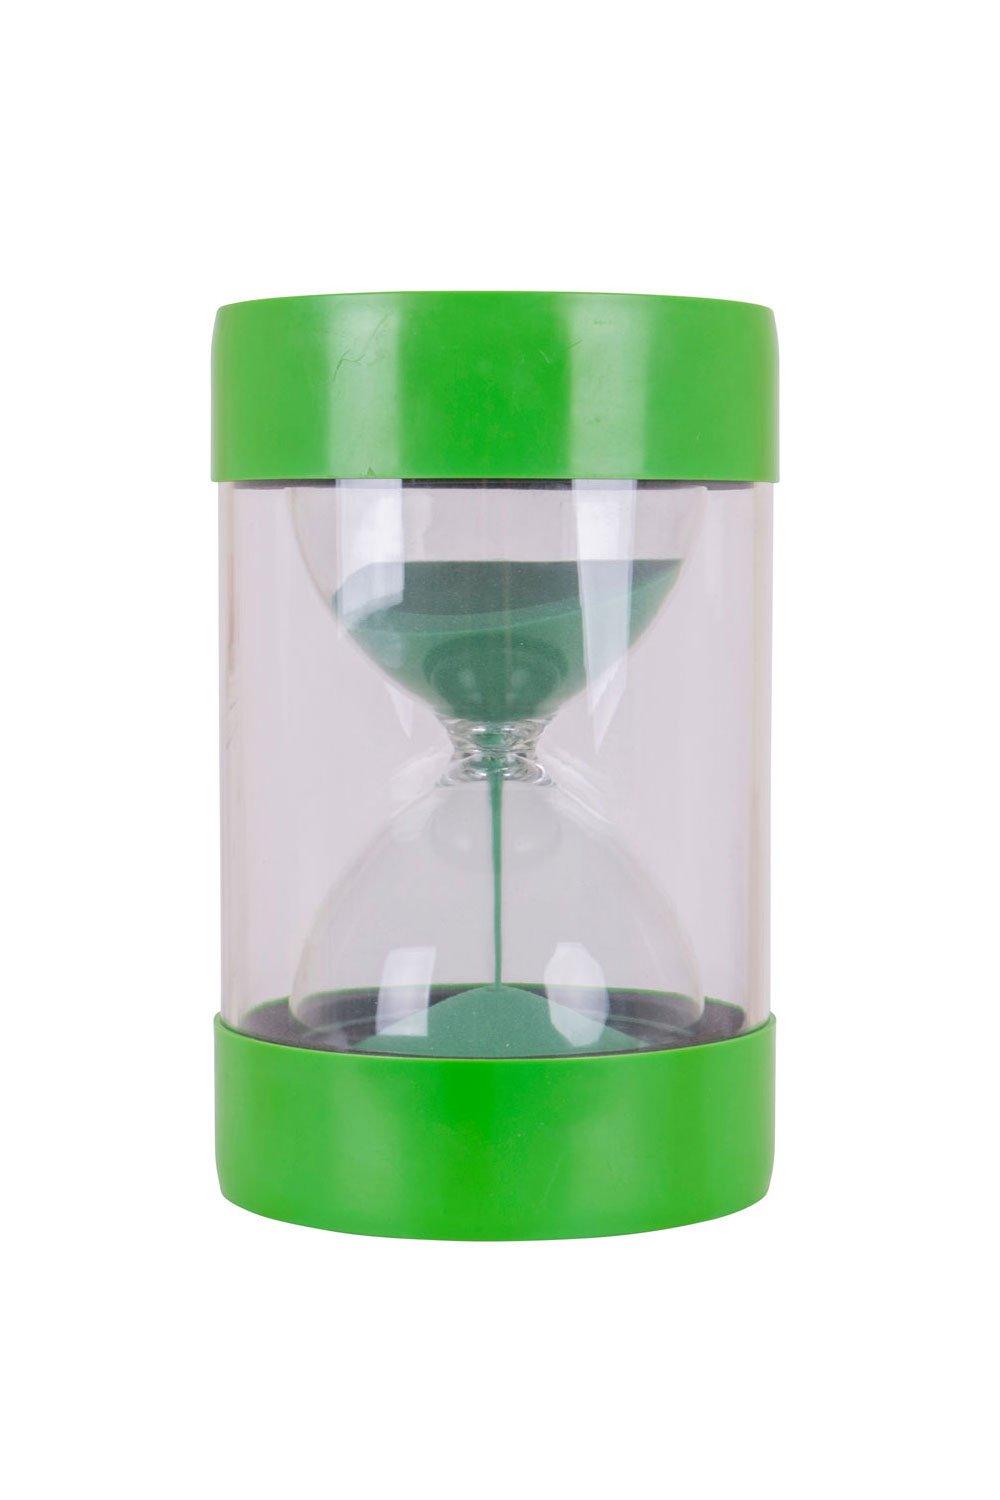 1 Minute’ Site on Sand Timer